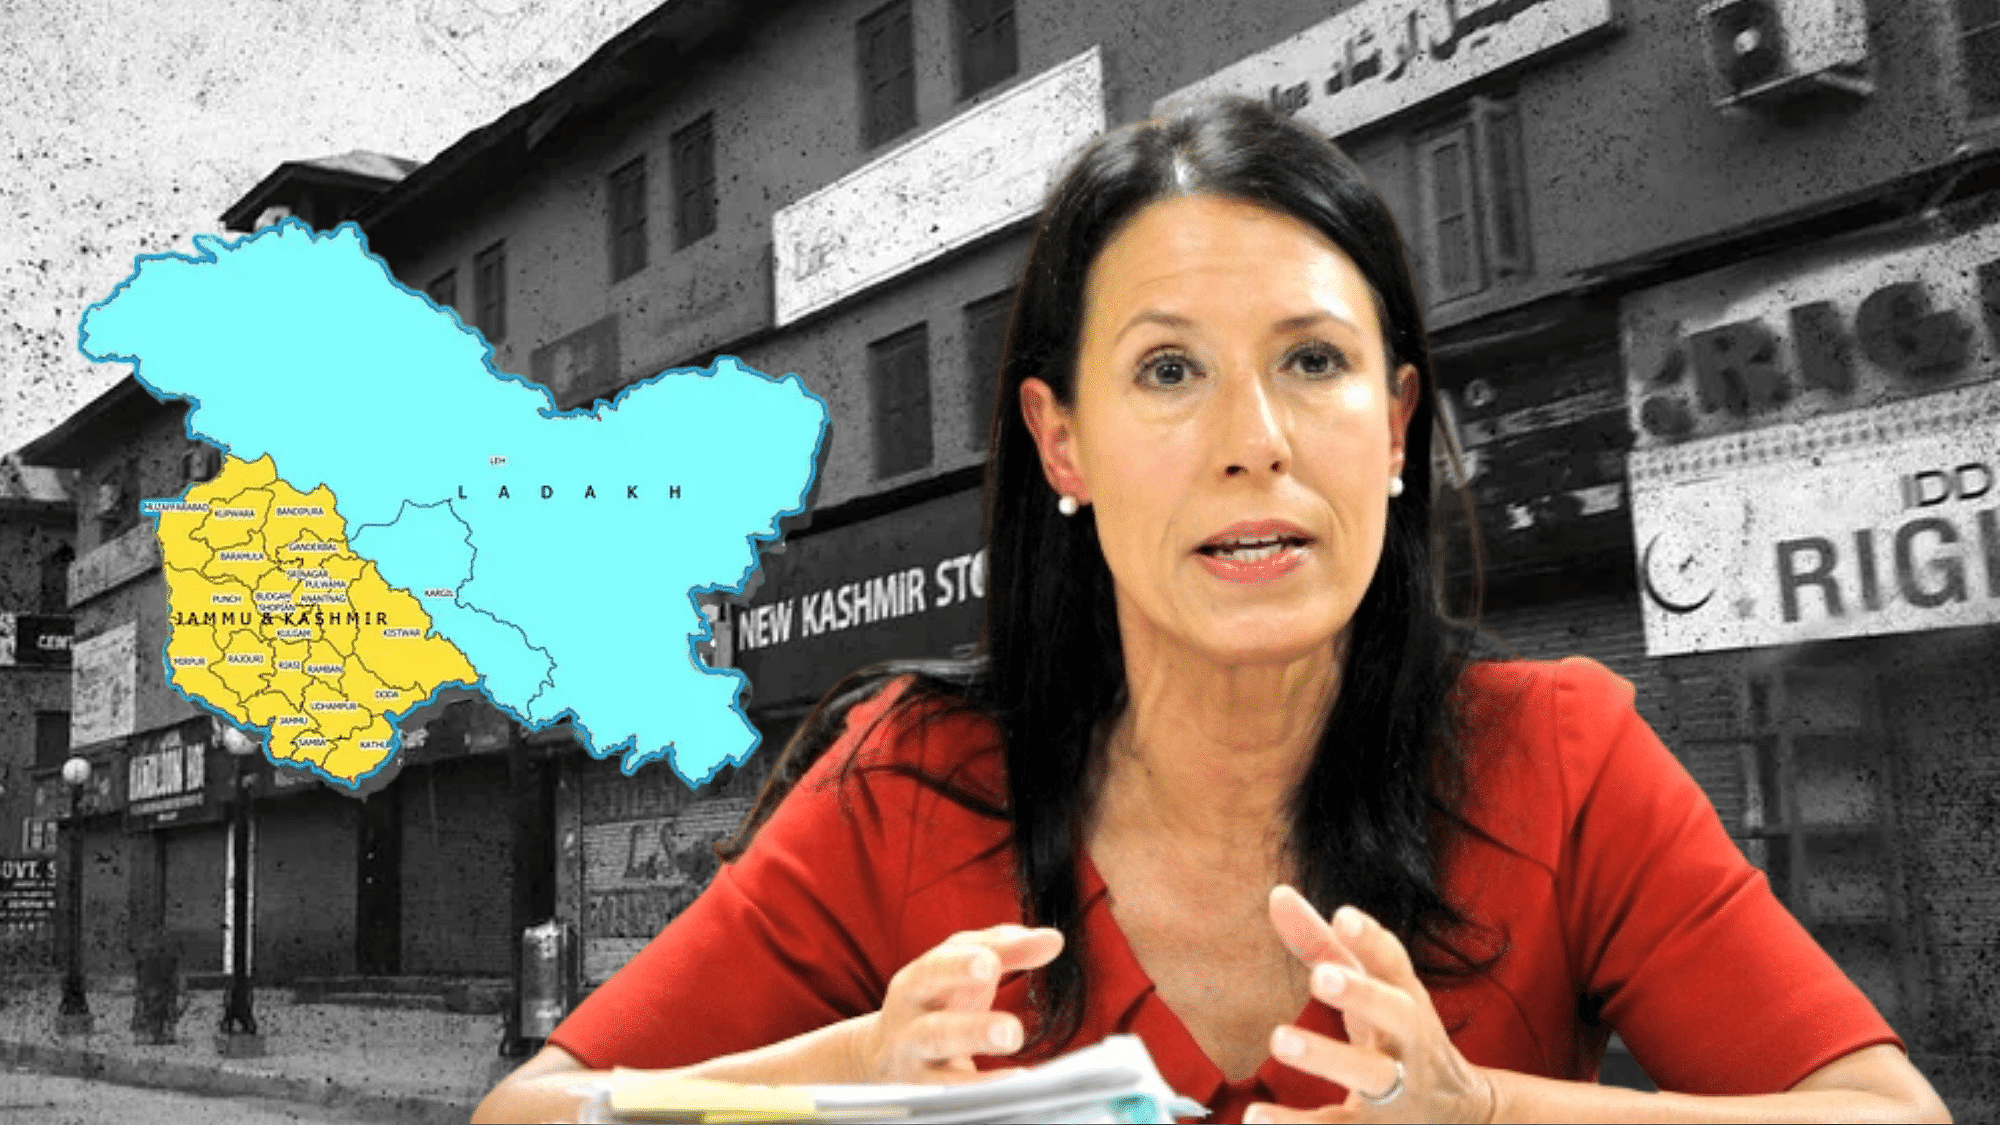 UK MP Debbie Abrahams has questioned whether she was deported from India because she has been critical of the Indian government on the situation in Kashmir.